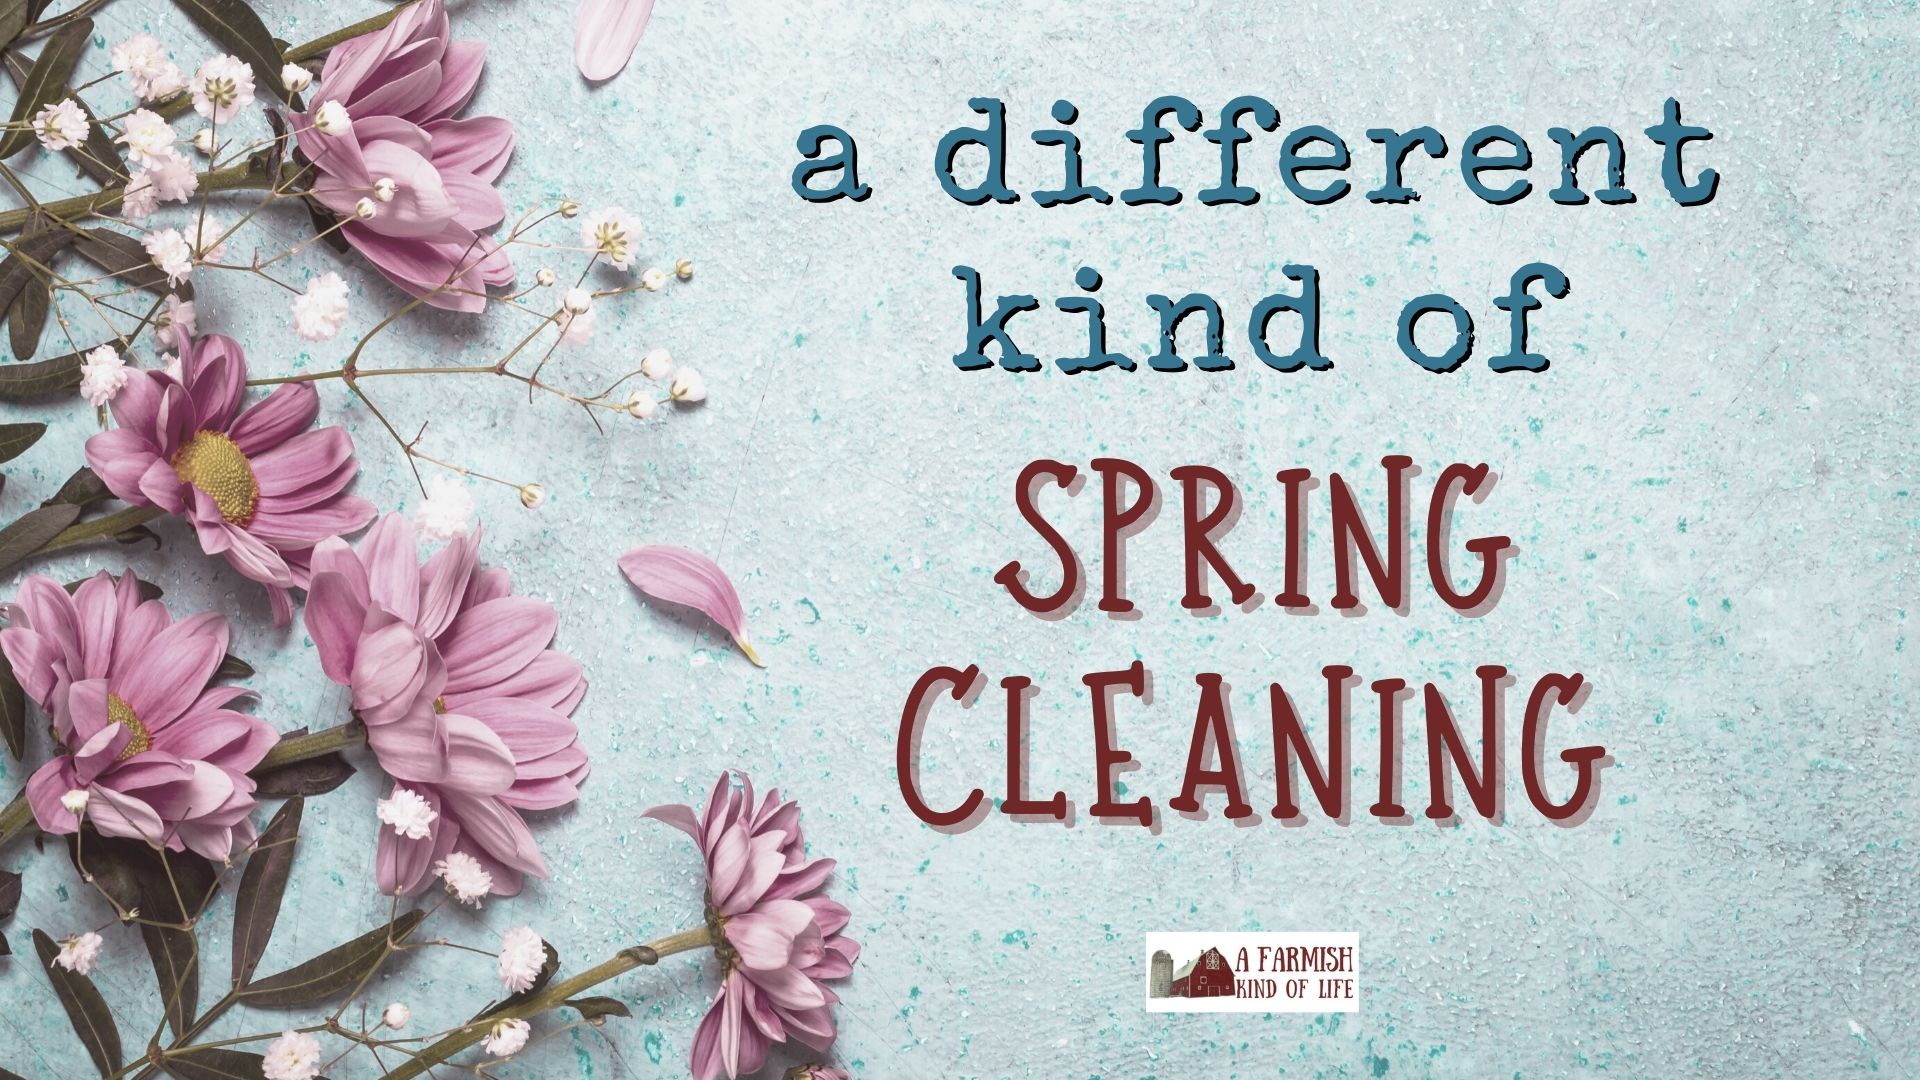 124: a different kind of spring cleaning